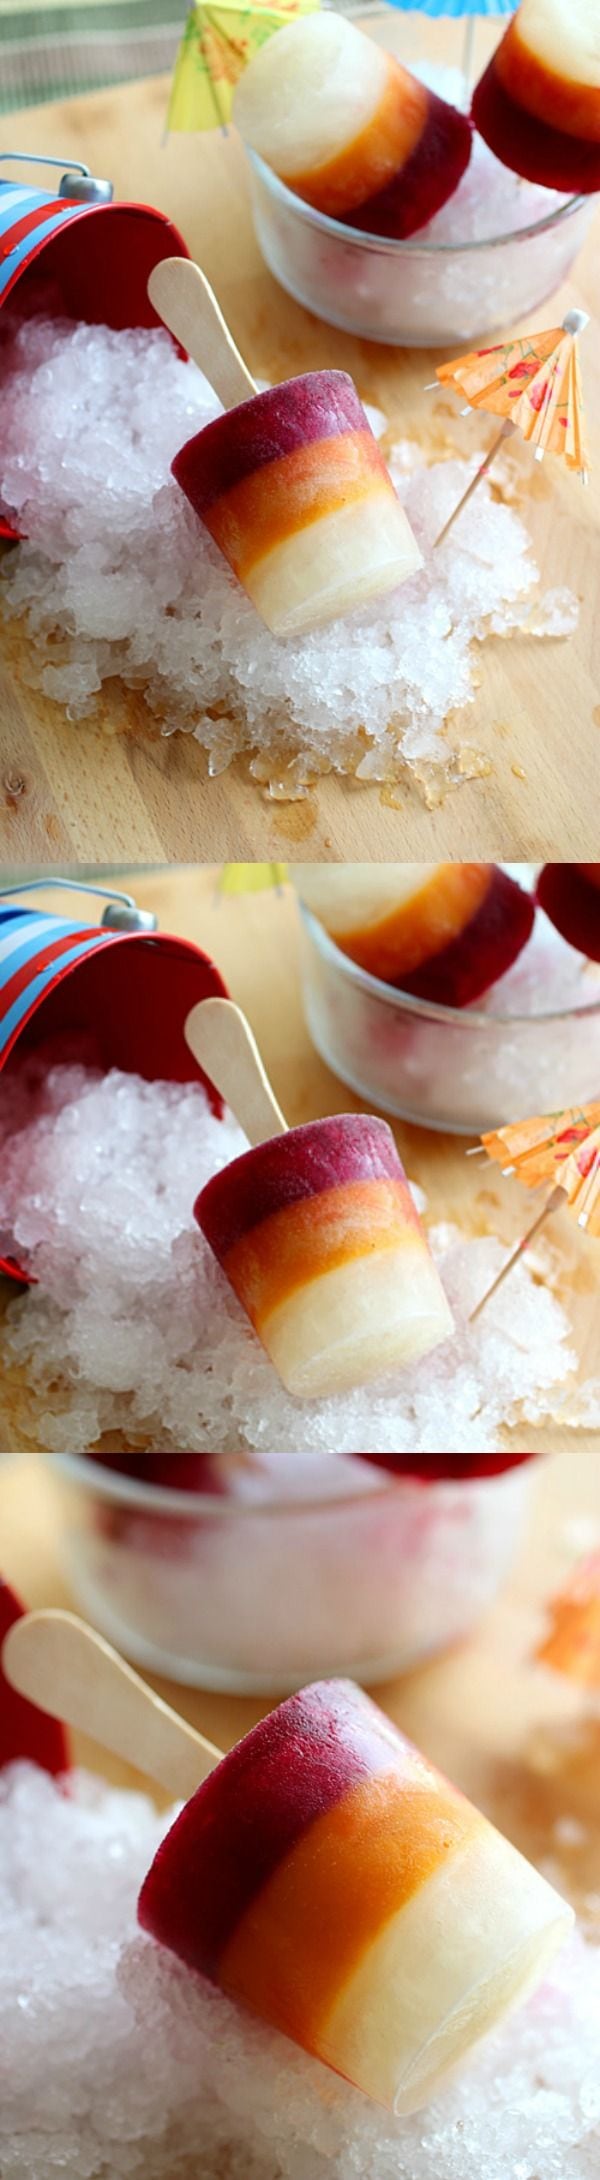 Pomegranate, Mango & Longan Popsicles - the most refreshing and fruity popsicles ever with gorgeous colors and flavors | rasamalaysia.com